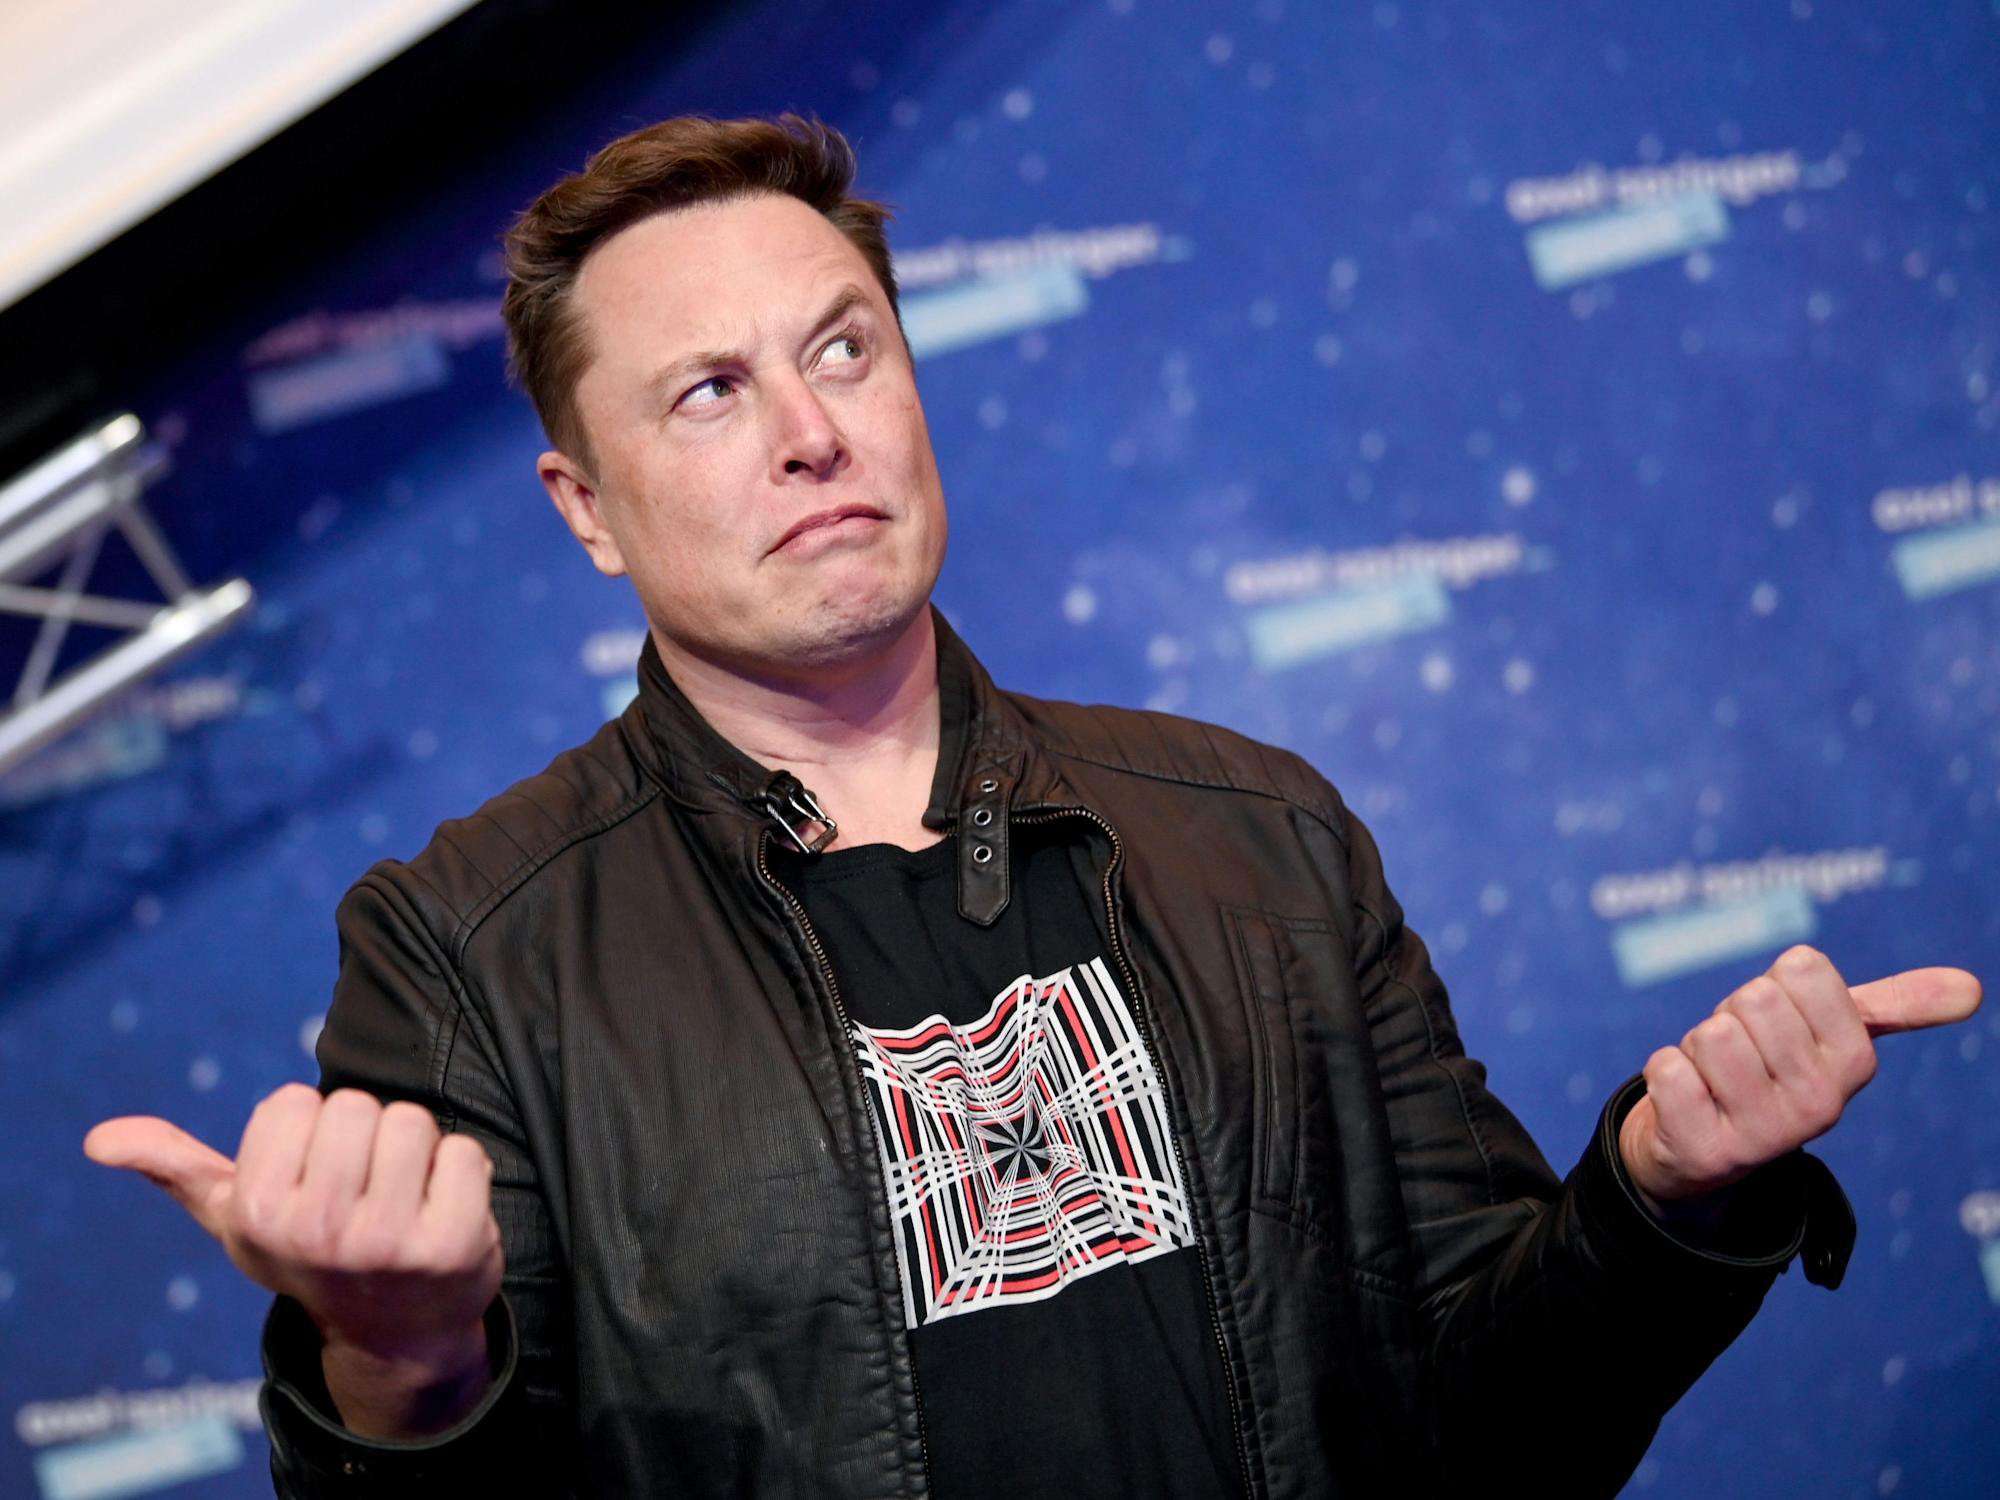 image for Elon Musk is losing his power over the crypto community after his latest tweets failed to boost dogecoin or bitcoin